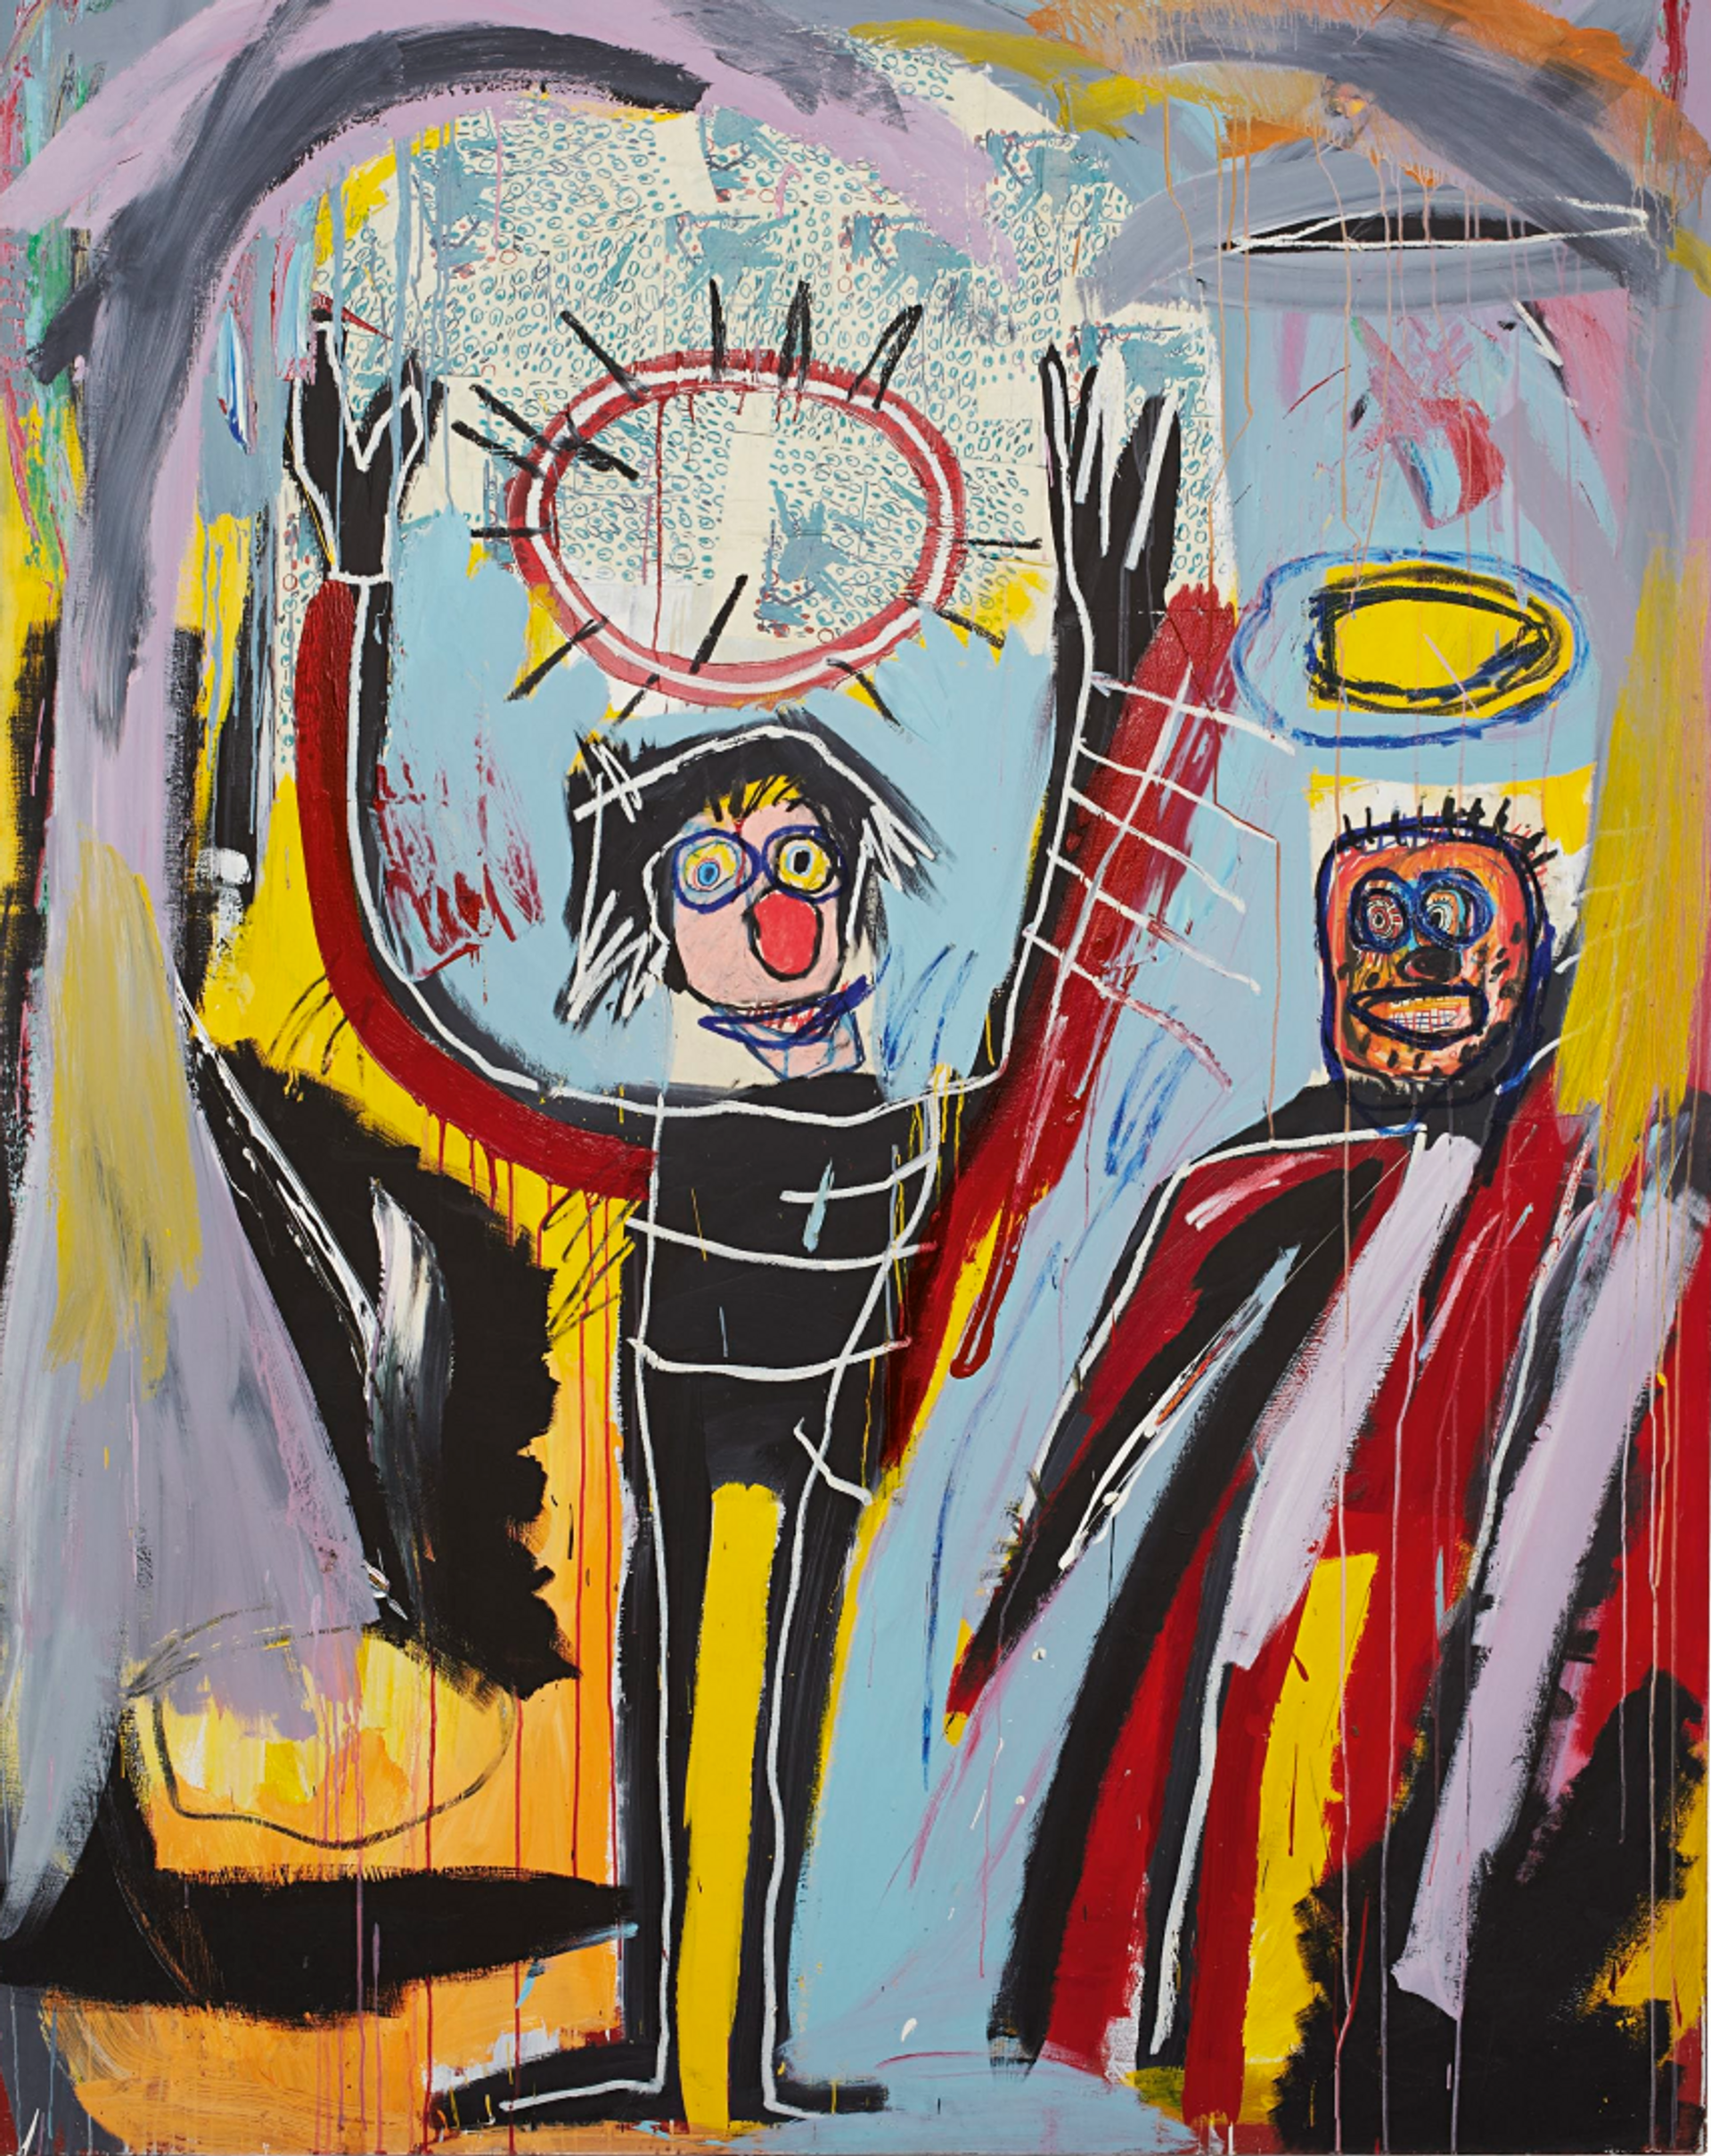 An image of the artwork Humidity by Jean-Michel Basquiat. It shows two figures crowned by halos, amidst a swirl of colours. One figure is raising its hands to the sky.